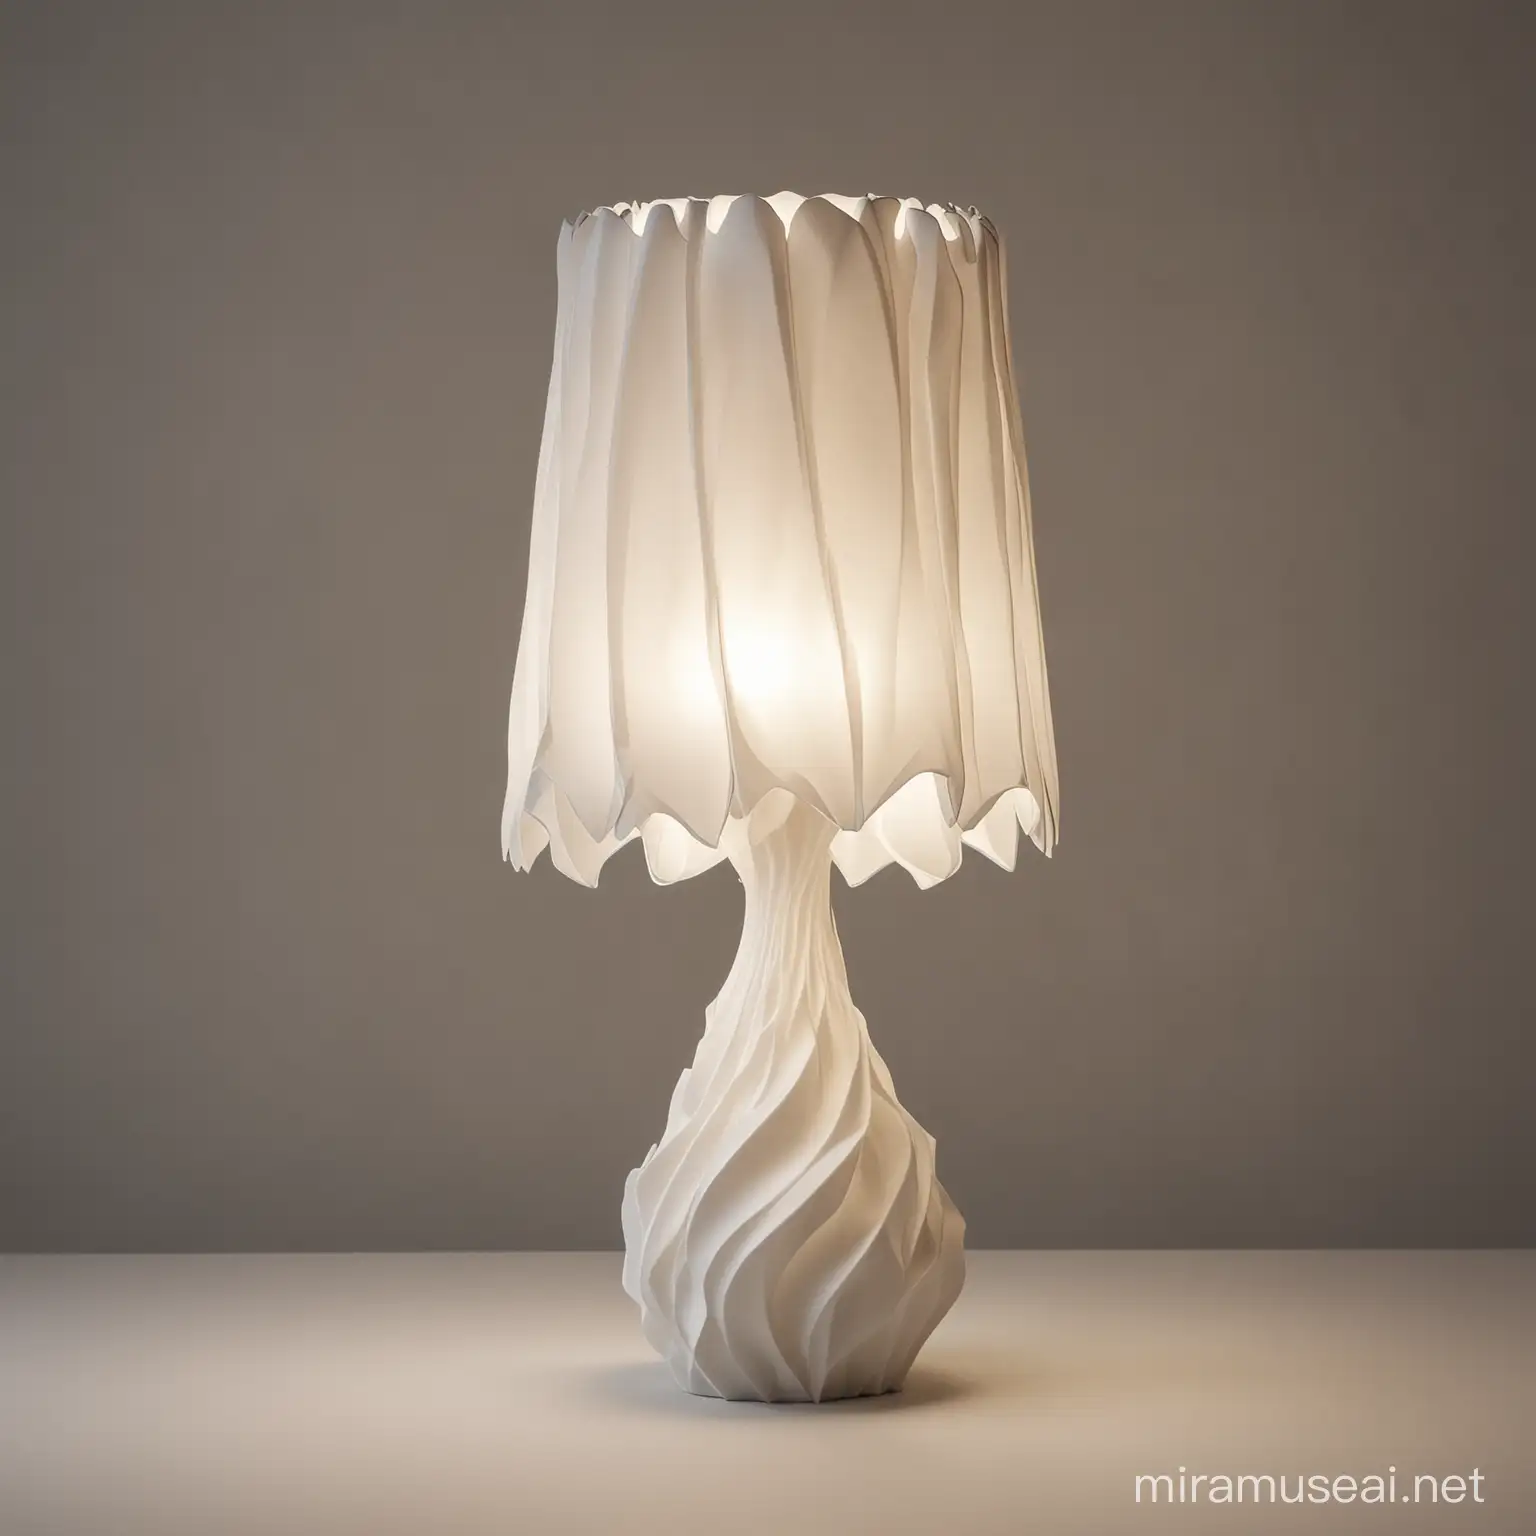 Issey MiyakeInspired 3D Printed Lamp with Cinematic Depth of Field